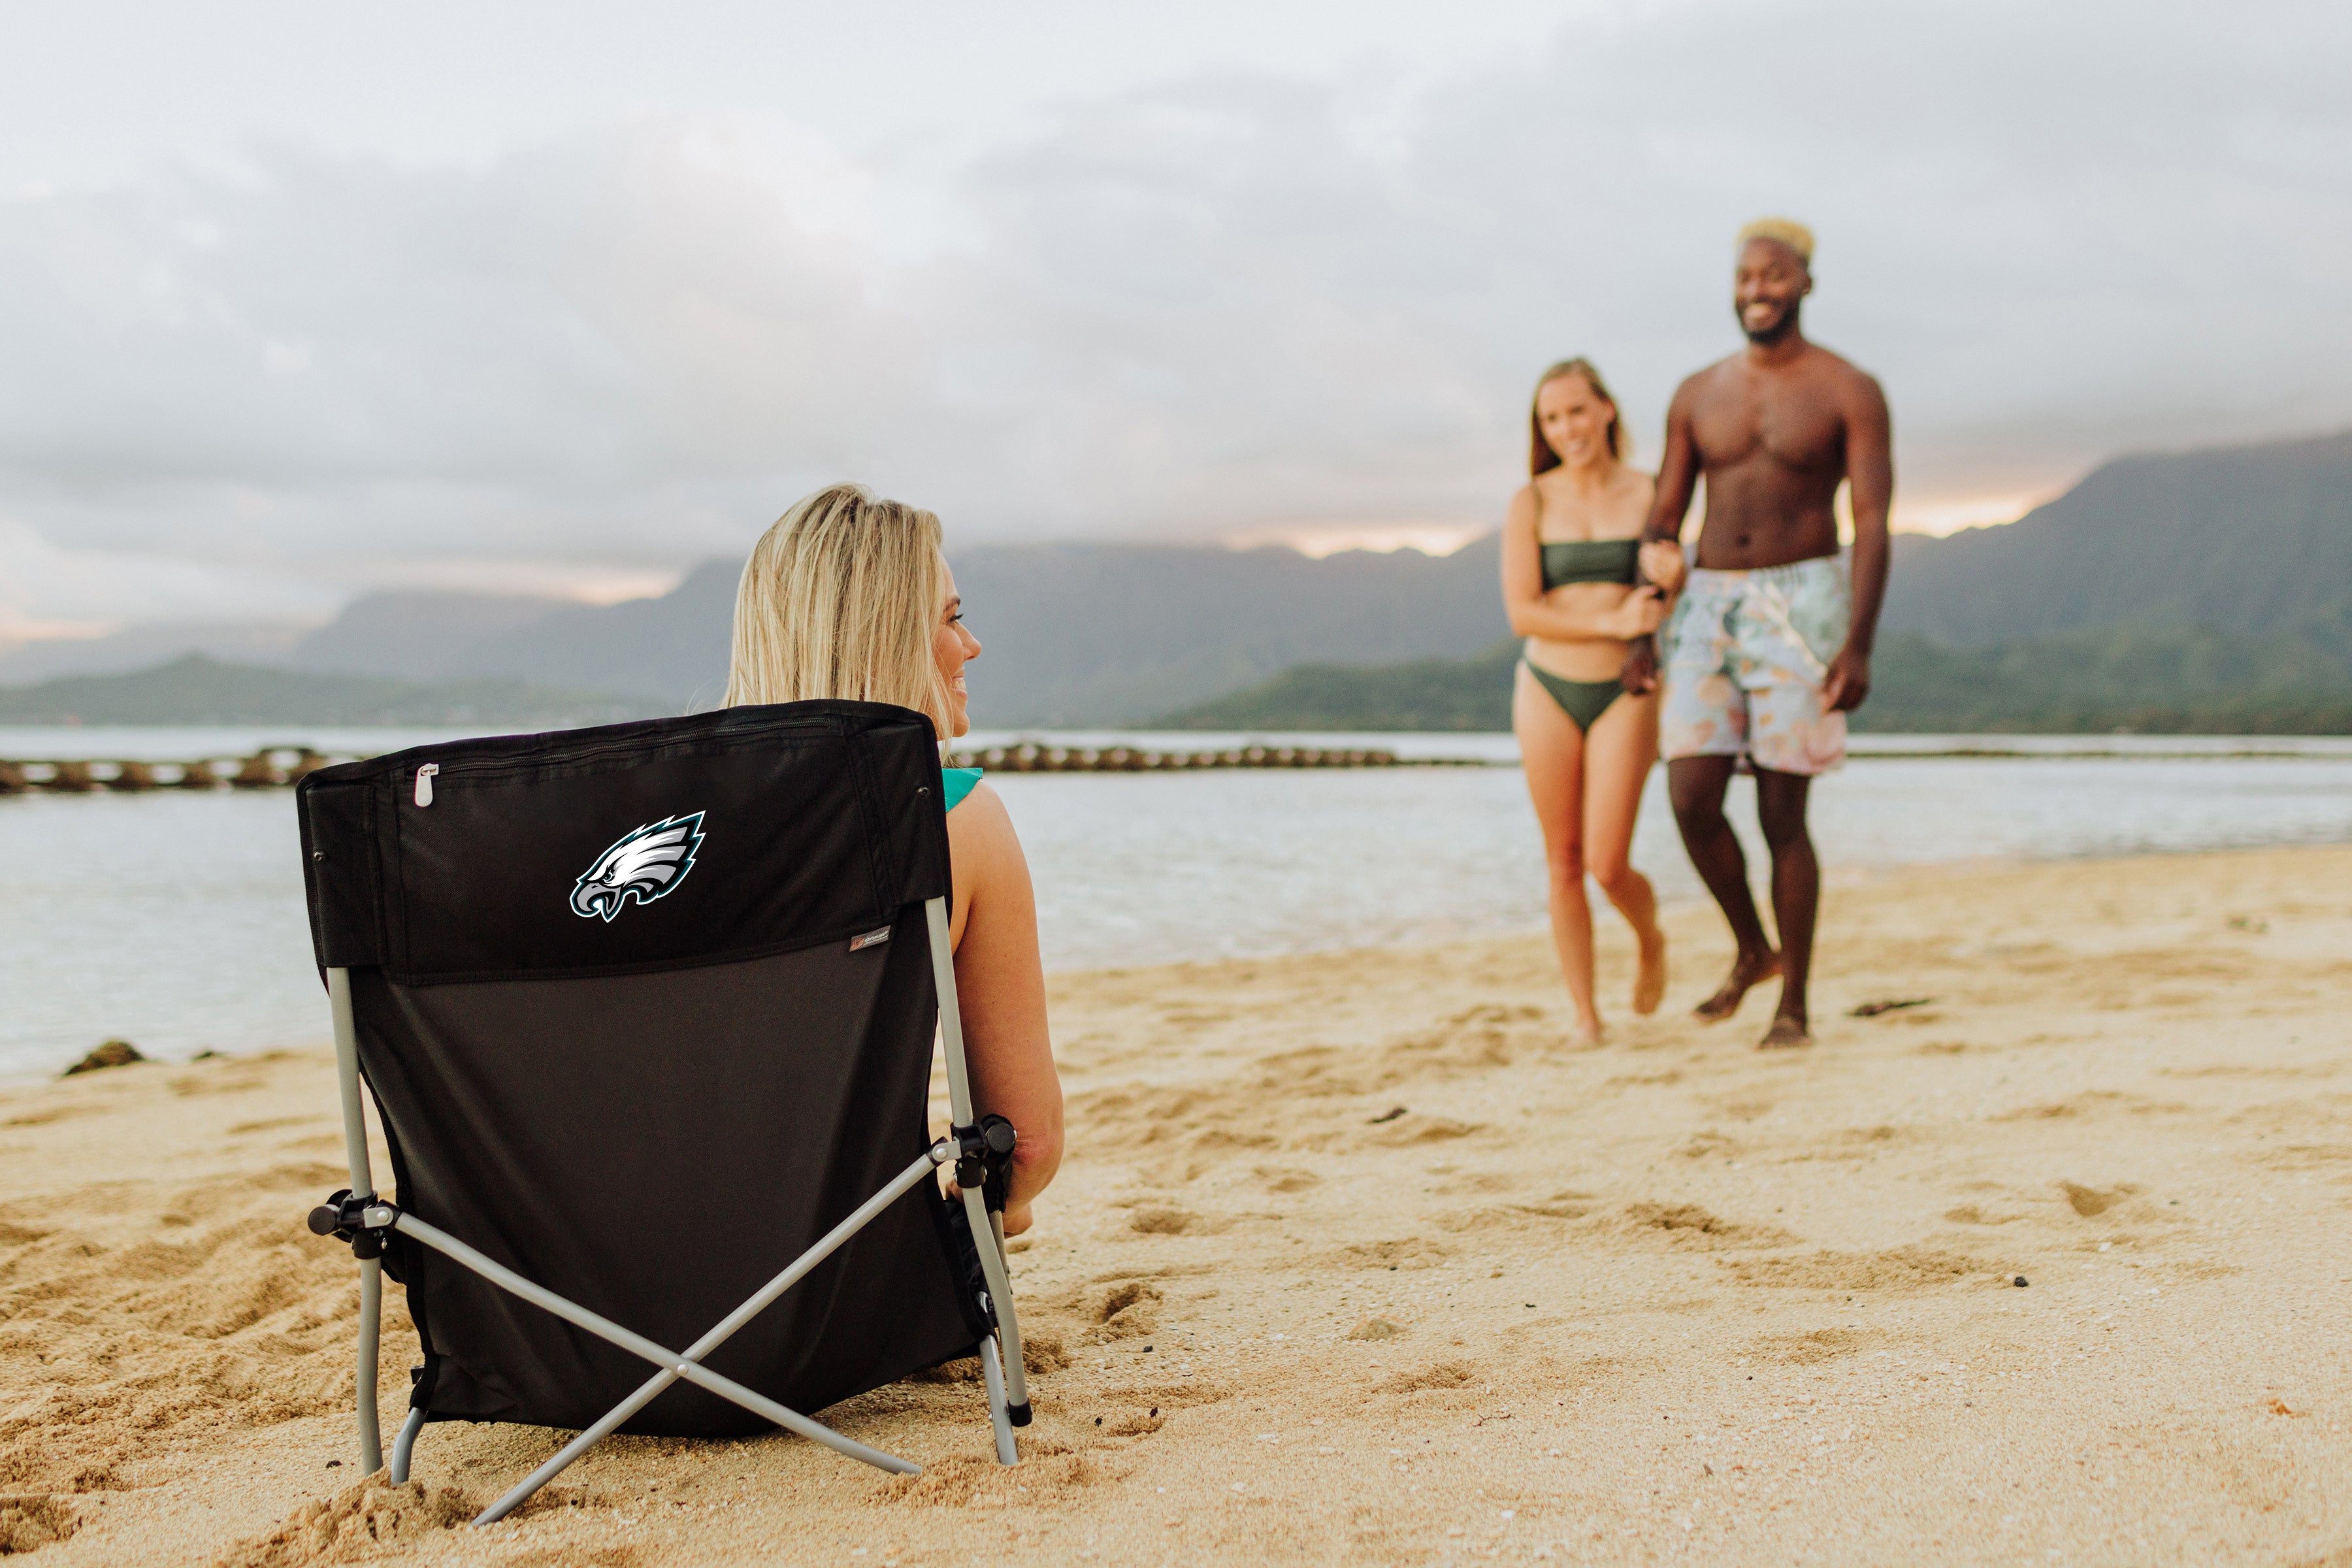 Philadelphia Eagles - Tranquility Beach Chair with Carry Bag